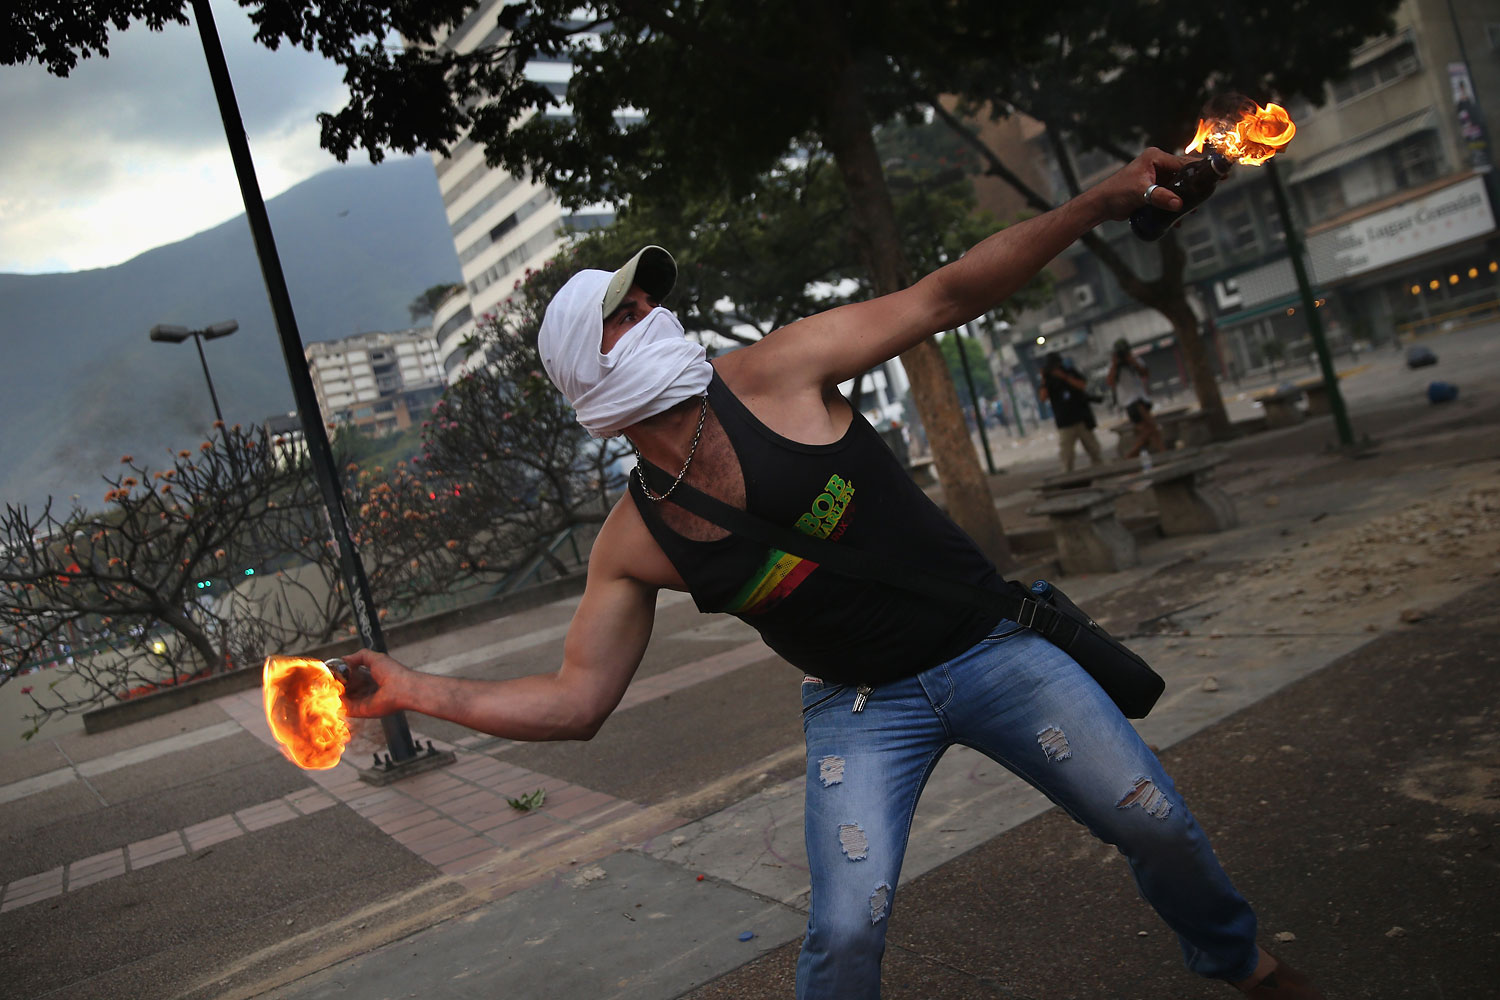 A protester throws a molotov cocktail at Venezuelan security forces during an anti-government demonstration on March 6, 2014 in Caracas.